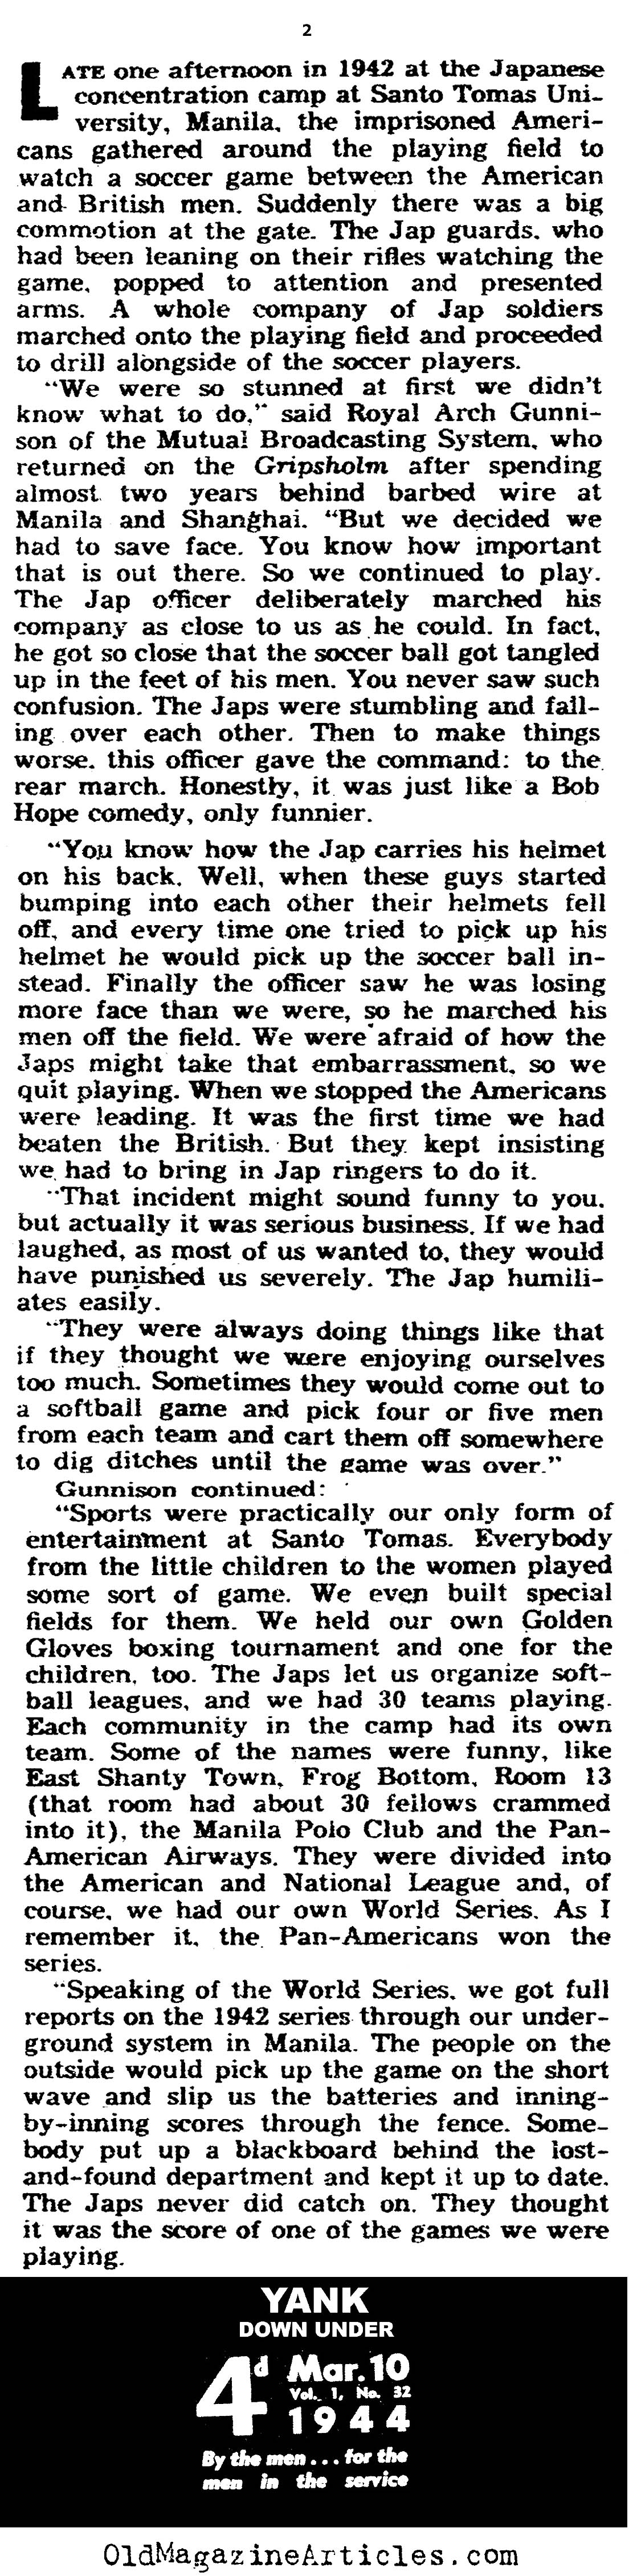 Sports in Japanese Prison Camps (Yank Magazine, 1944)